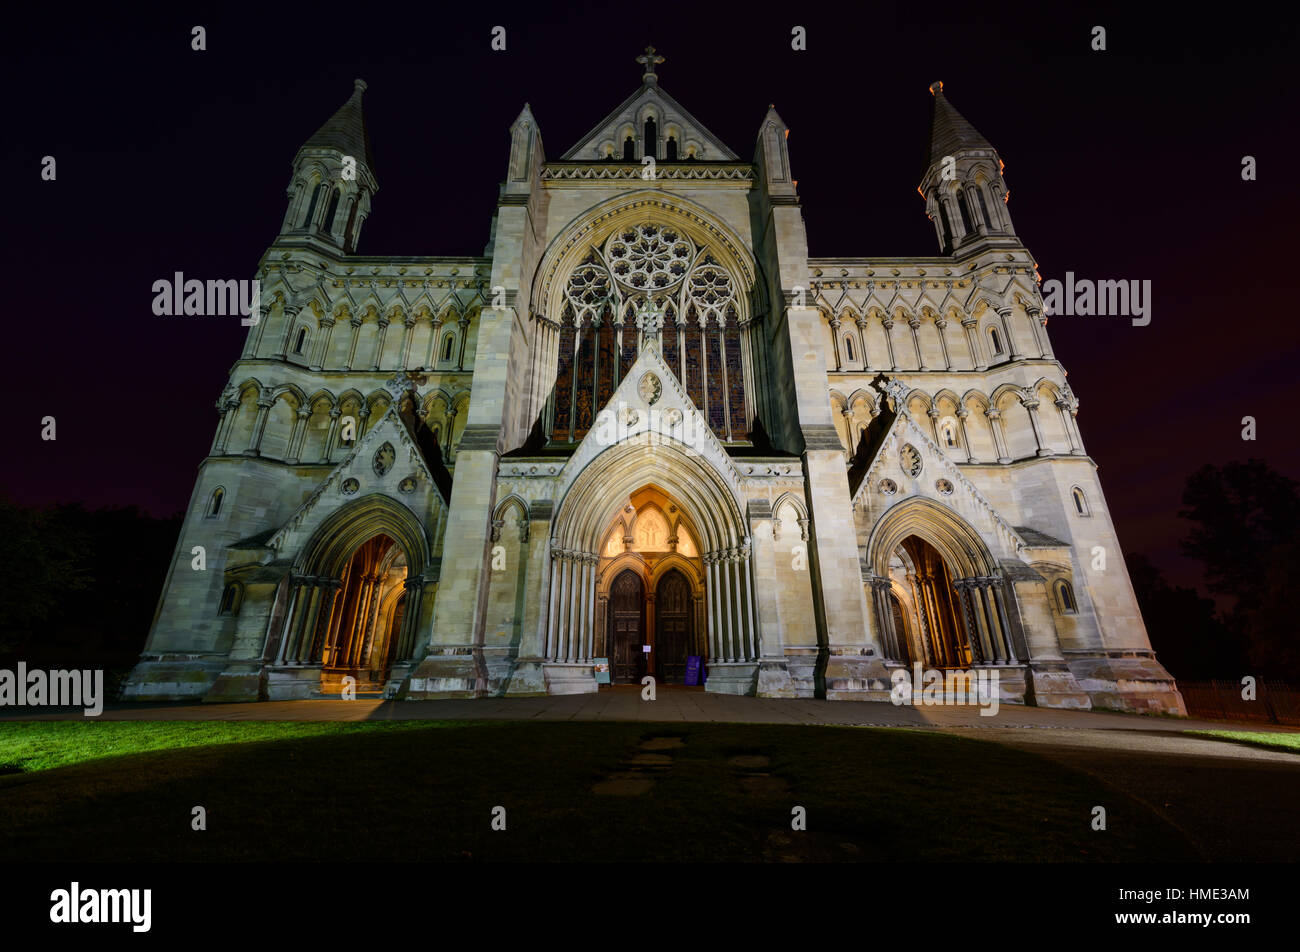 Night time view of the lit up facade of St Albans Cathedral (St Albans, Hertfordshire) Stock Photo